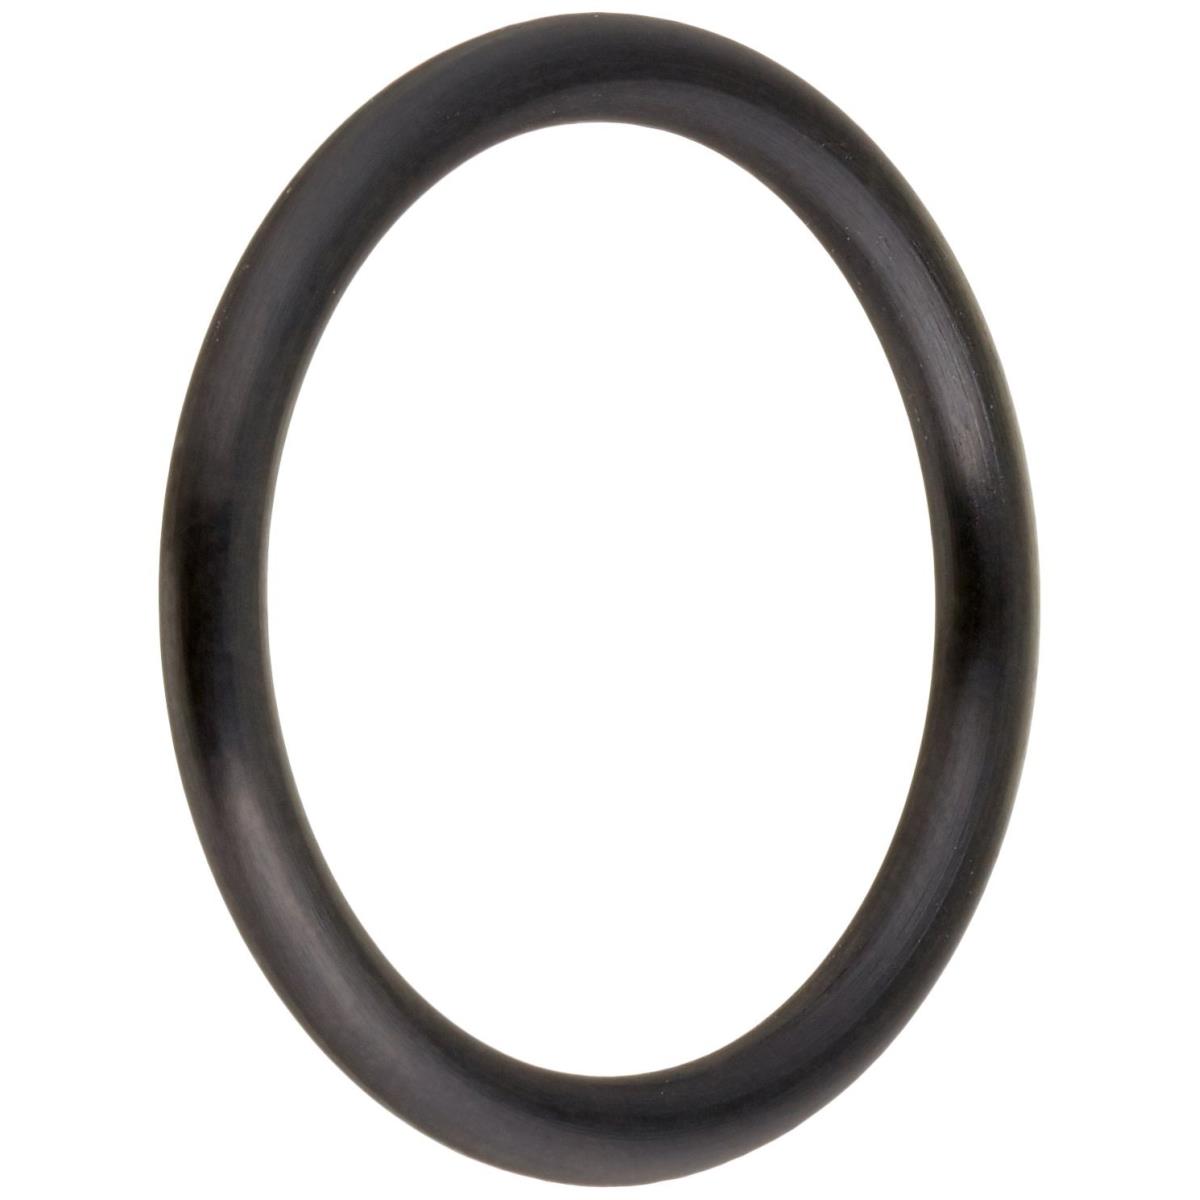 Omnipure-h-118 Omnipure Filter Head O-ring